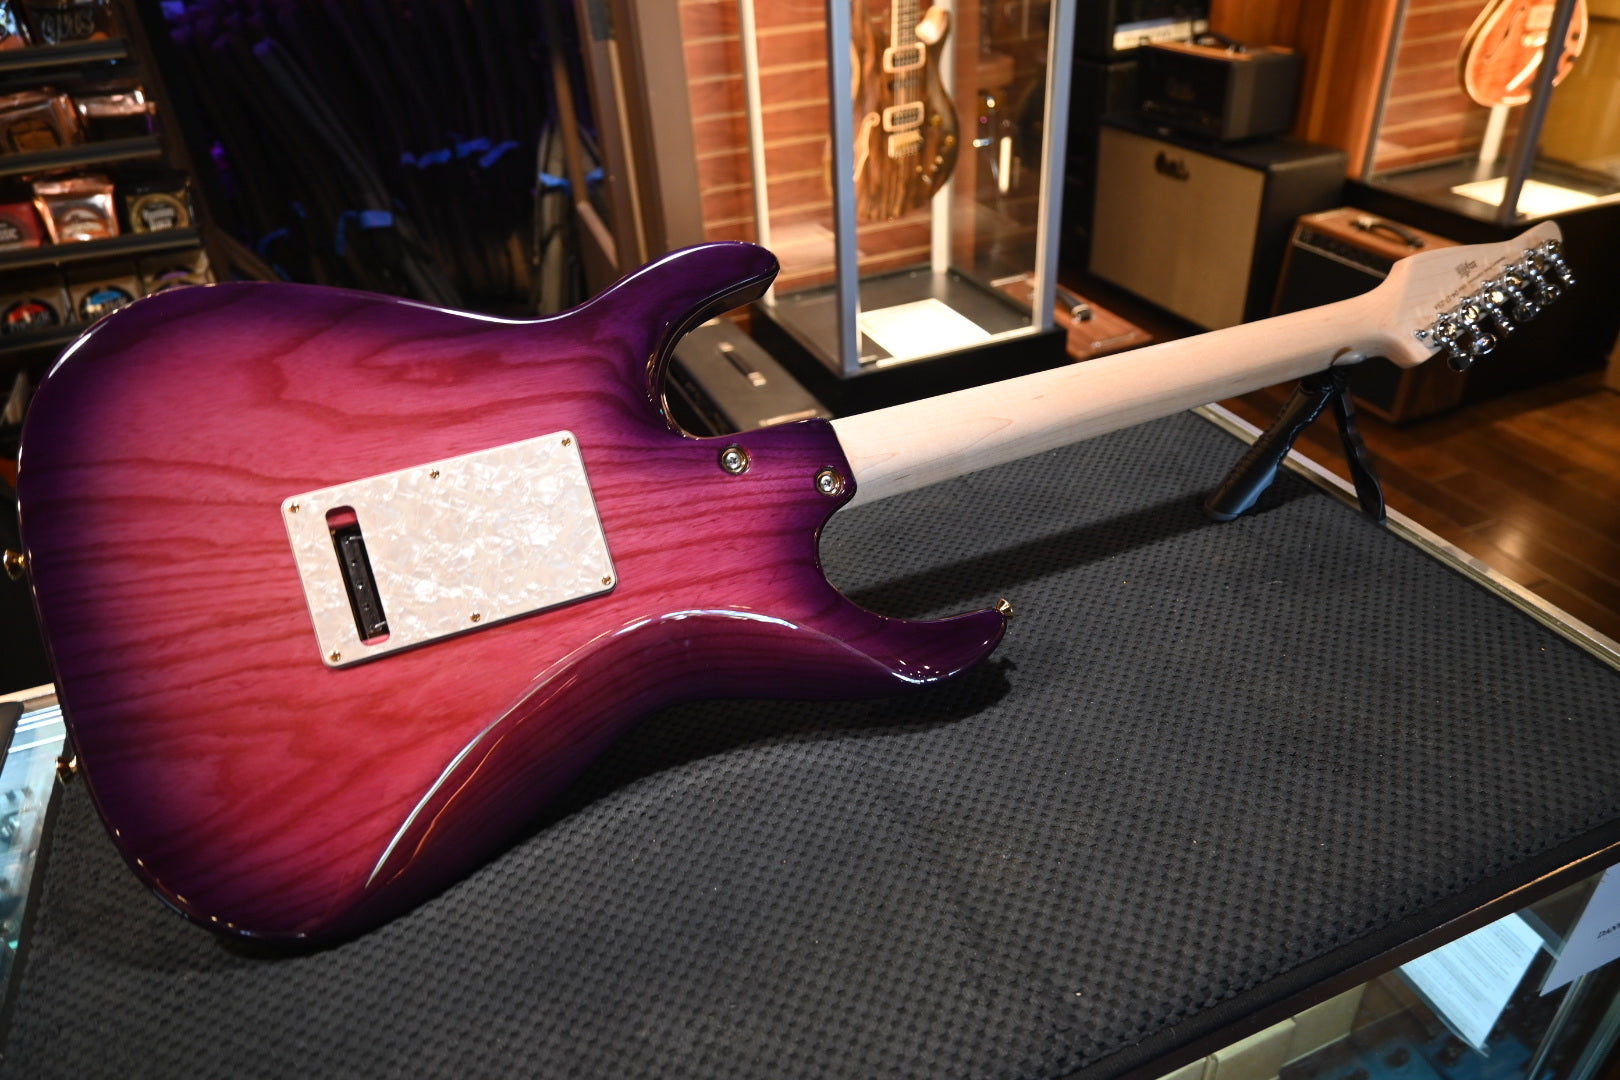 Tom Anderson Guardian Angel - Natural Pink to Purple Burst Guitar #723A - Danville Music